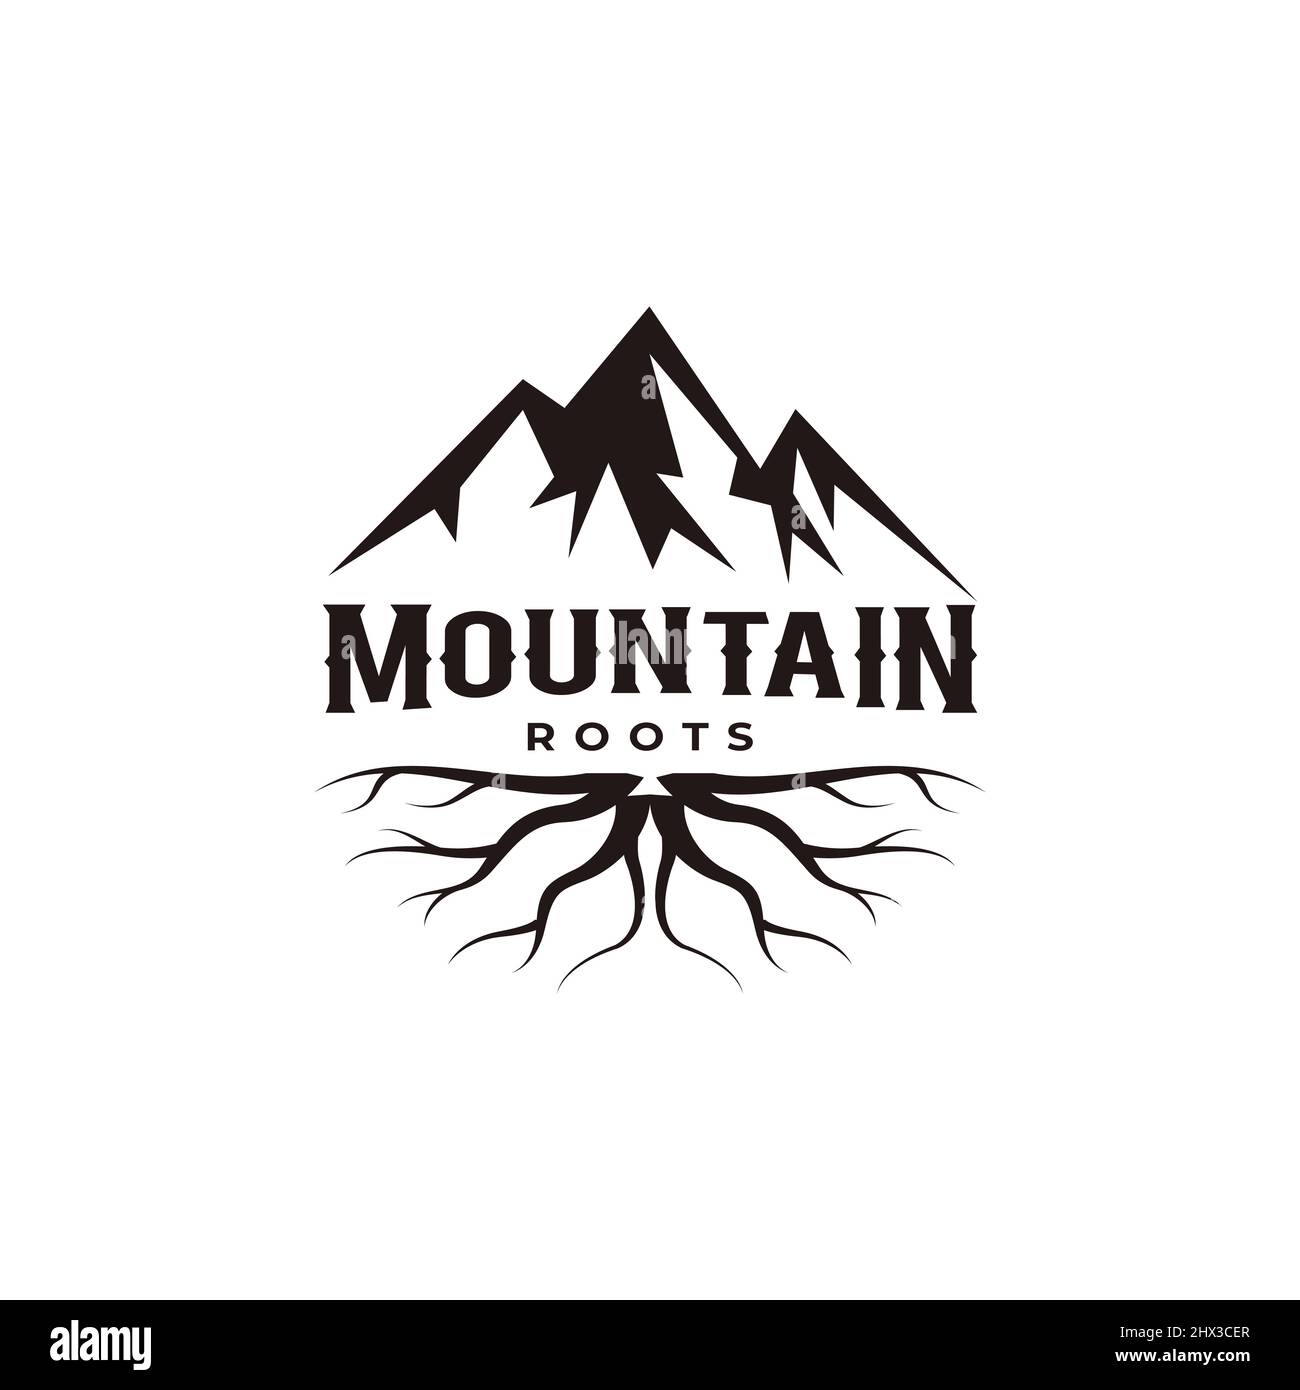 Mountain vector illustration logo with creeper roots vintage design Stock Vector